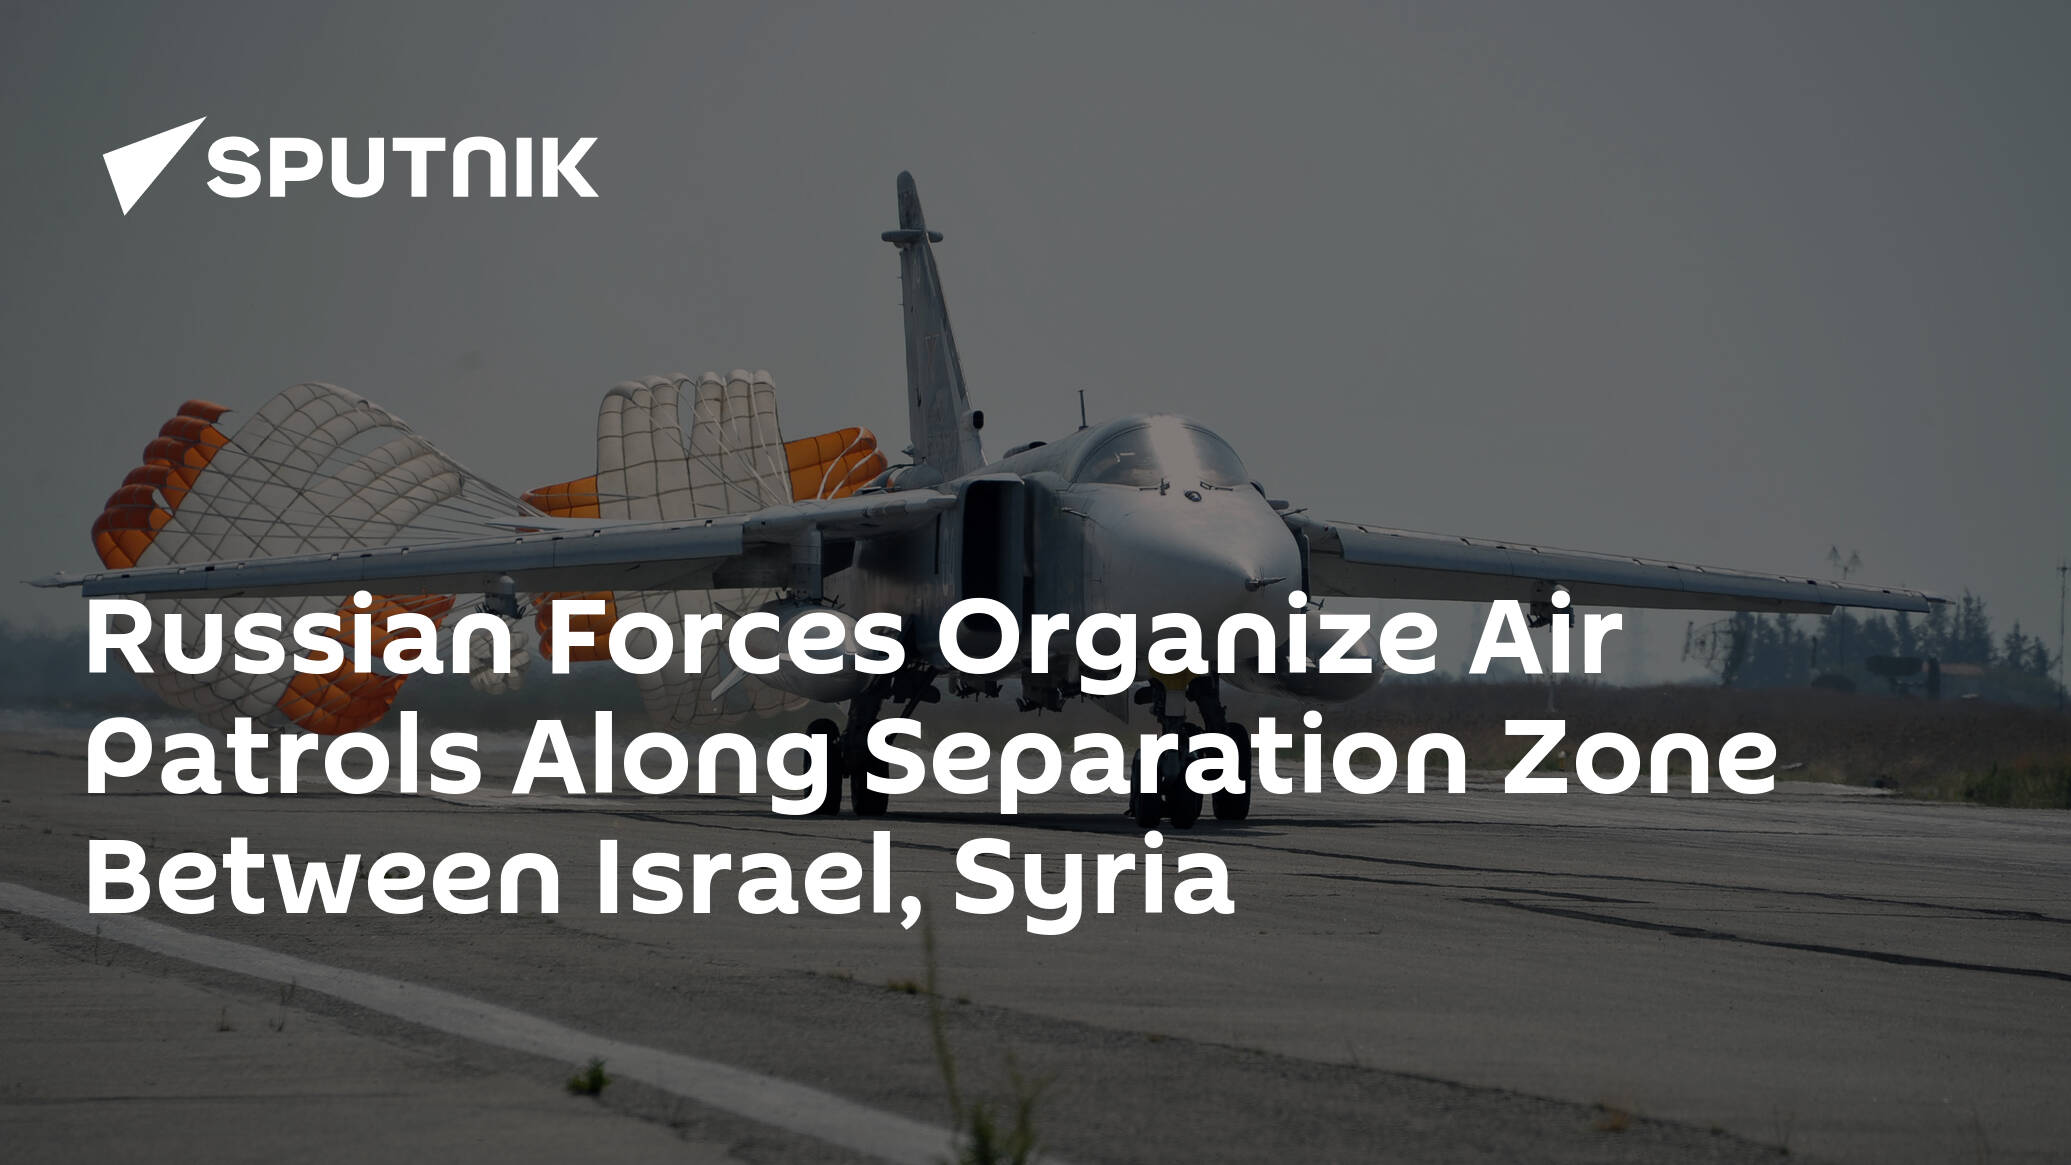 Russian Forces Organize Air Patrols Along Separation Zone Between Israel, Syria